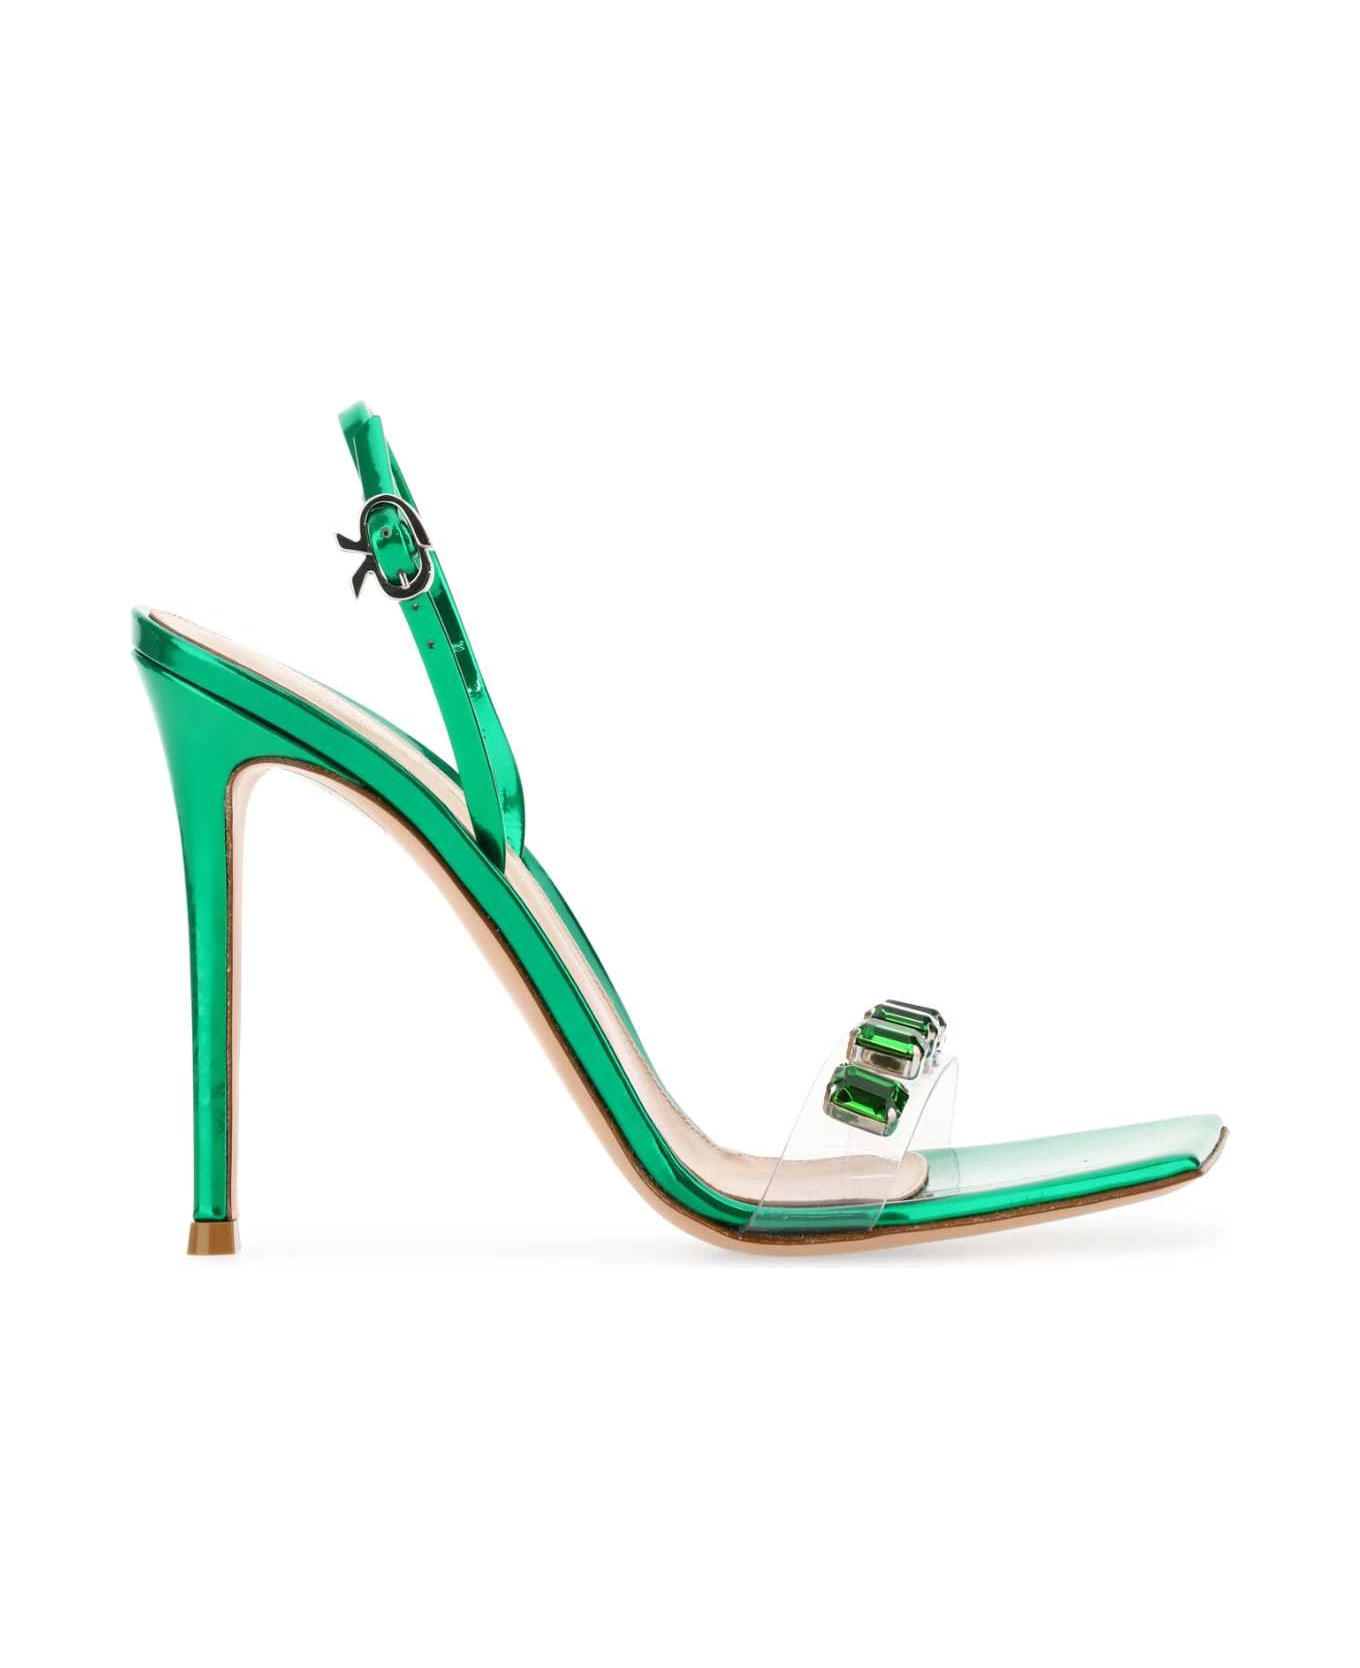 Gianvito Rossi Green Leather â and Pvc Ribbon Candy Sandals - TRGR